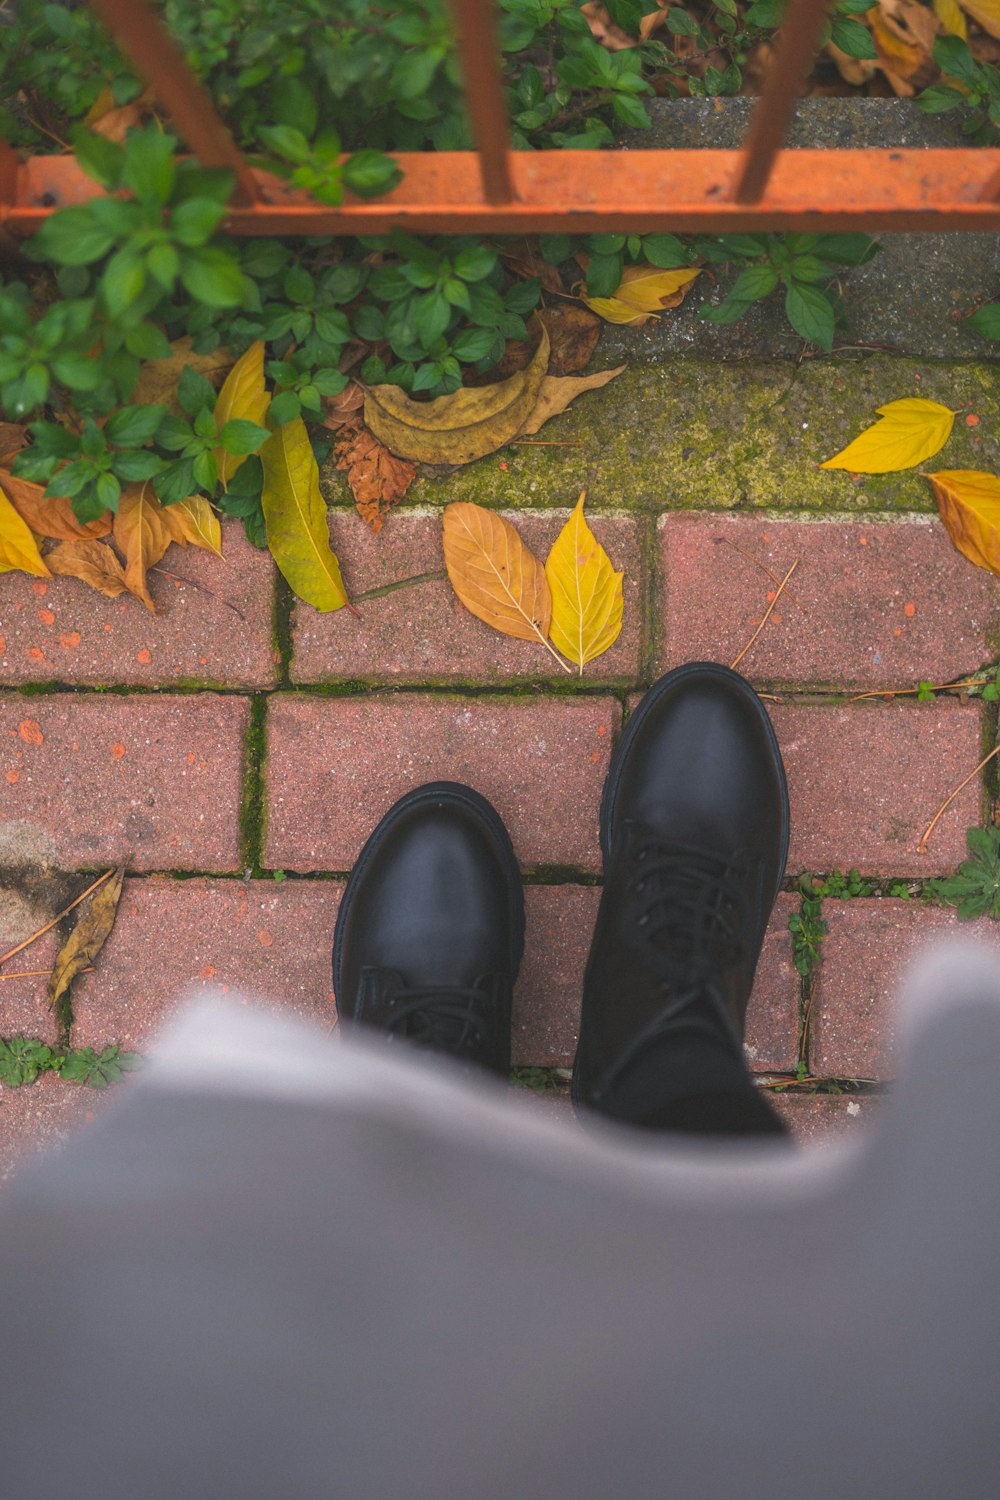 a pair of feet in black shoes on a brick surface